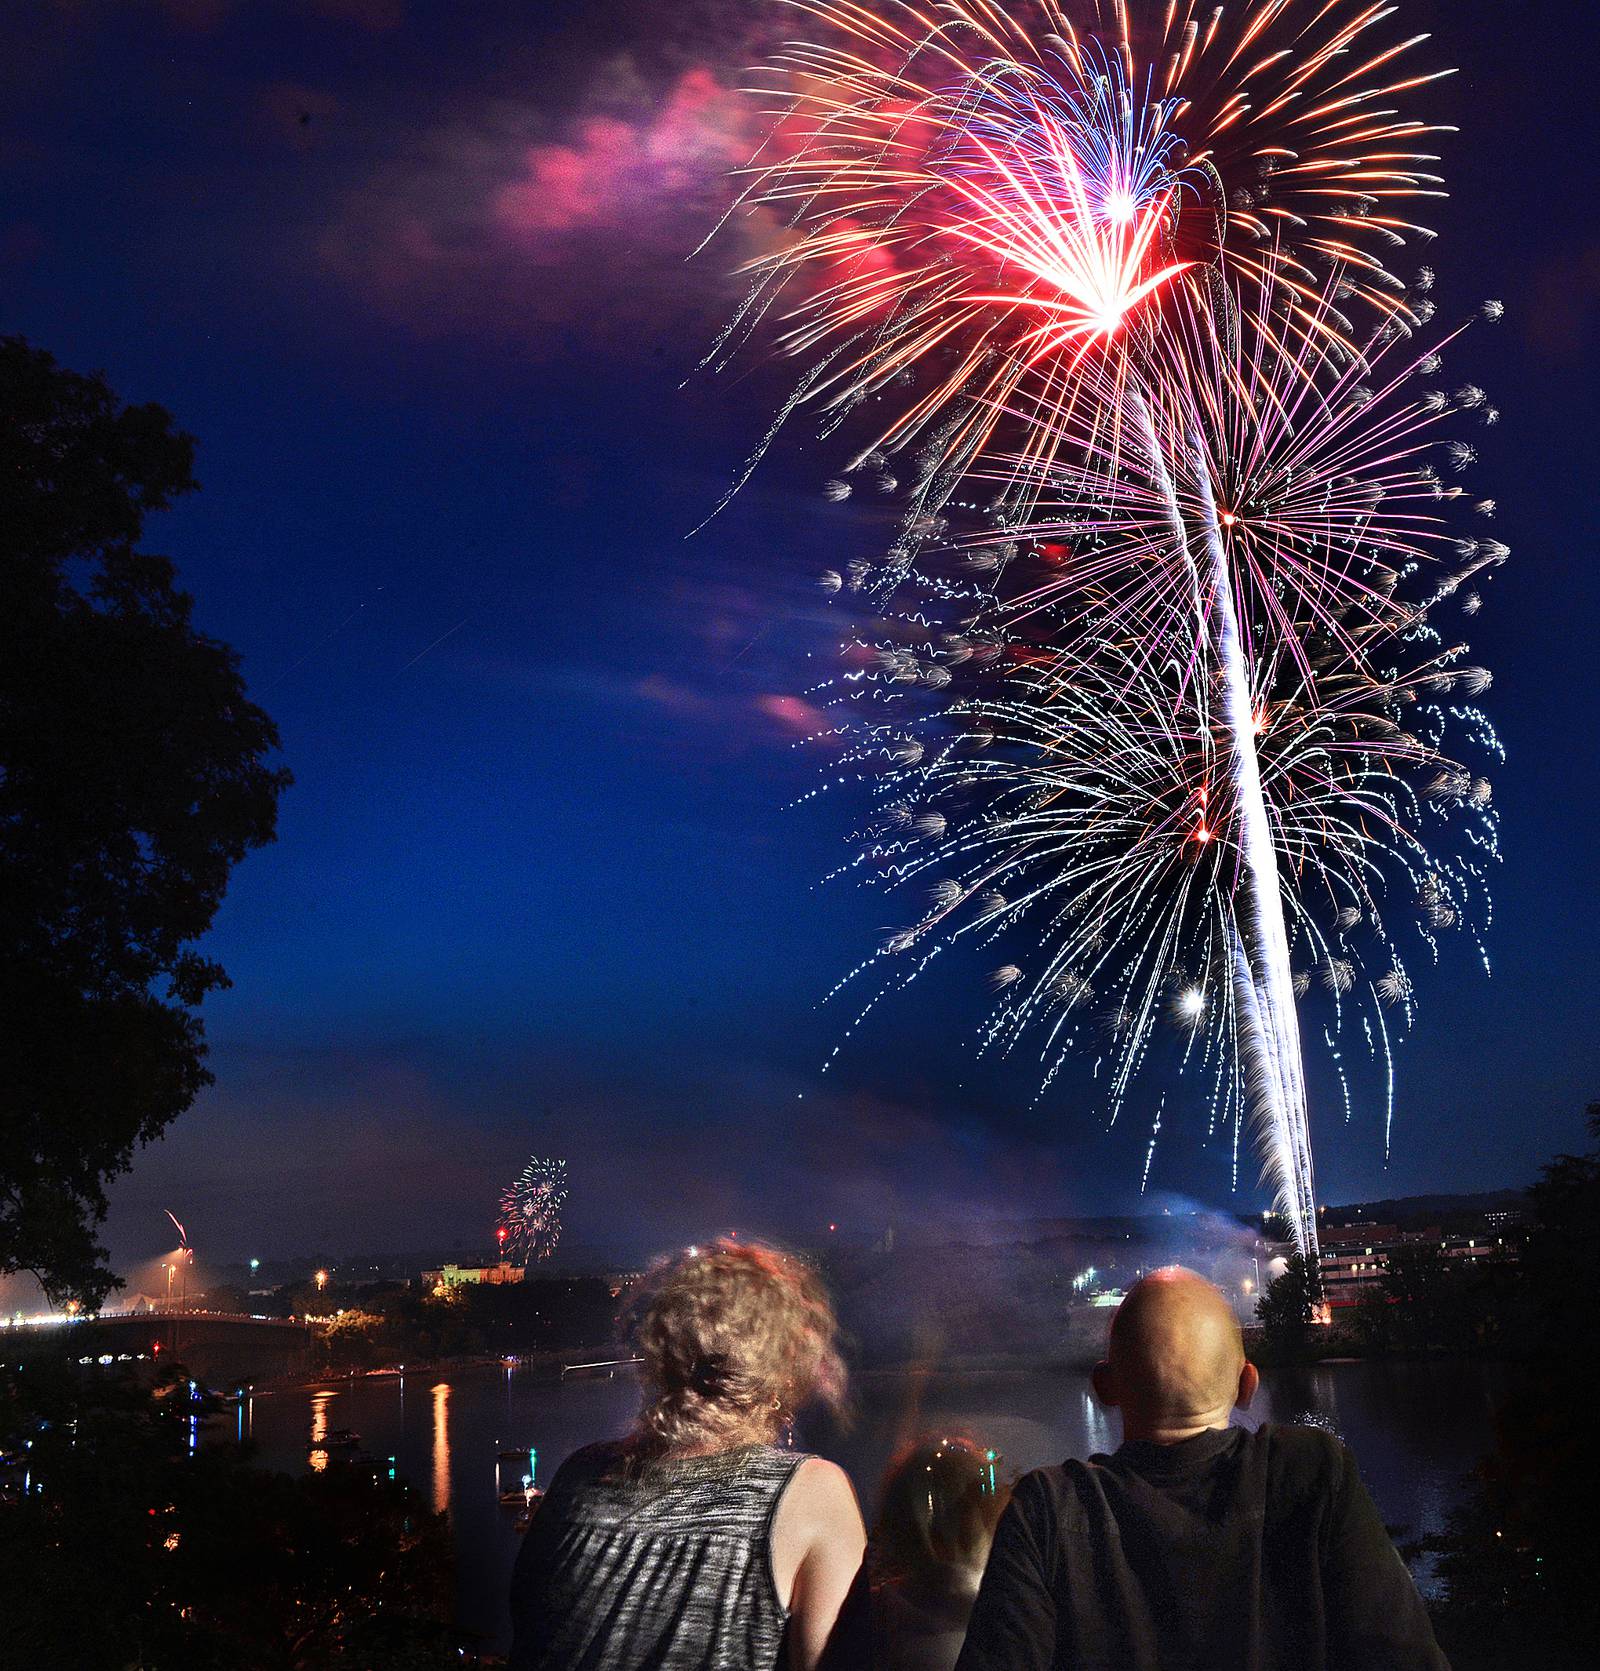 A guide to the summer’s fireworks shows in La Salle, Bureau, Putnam